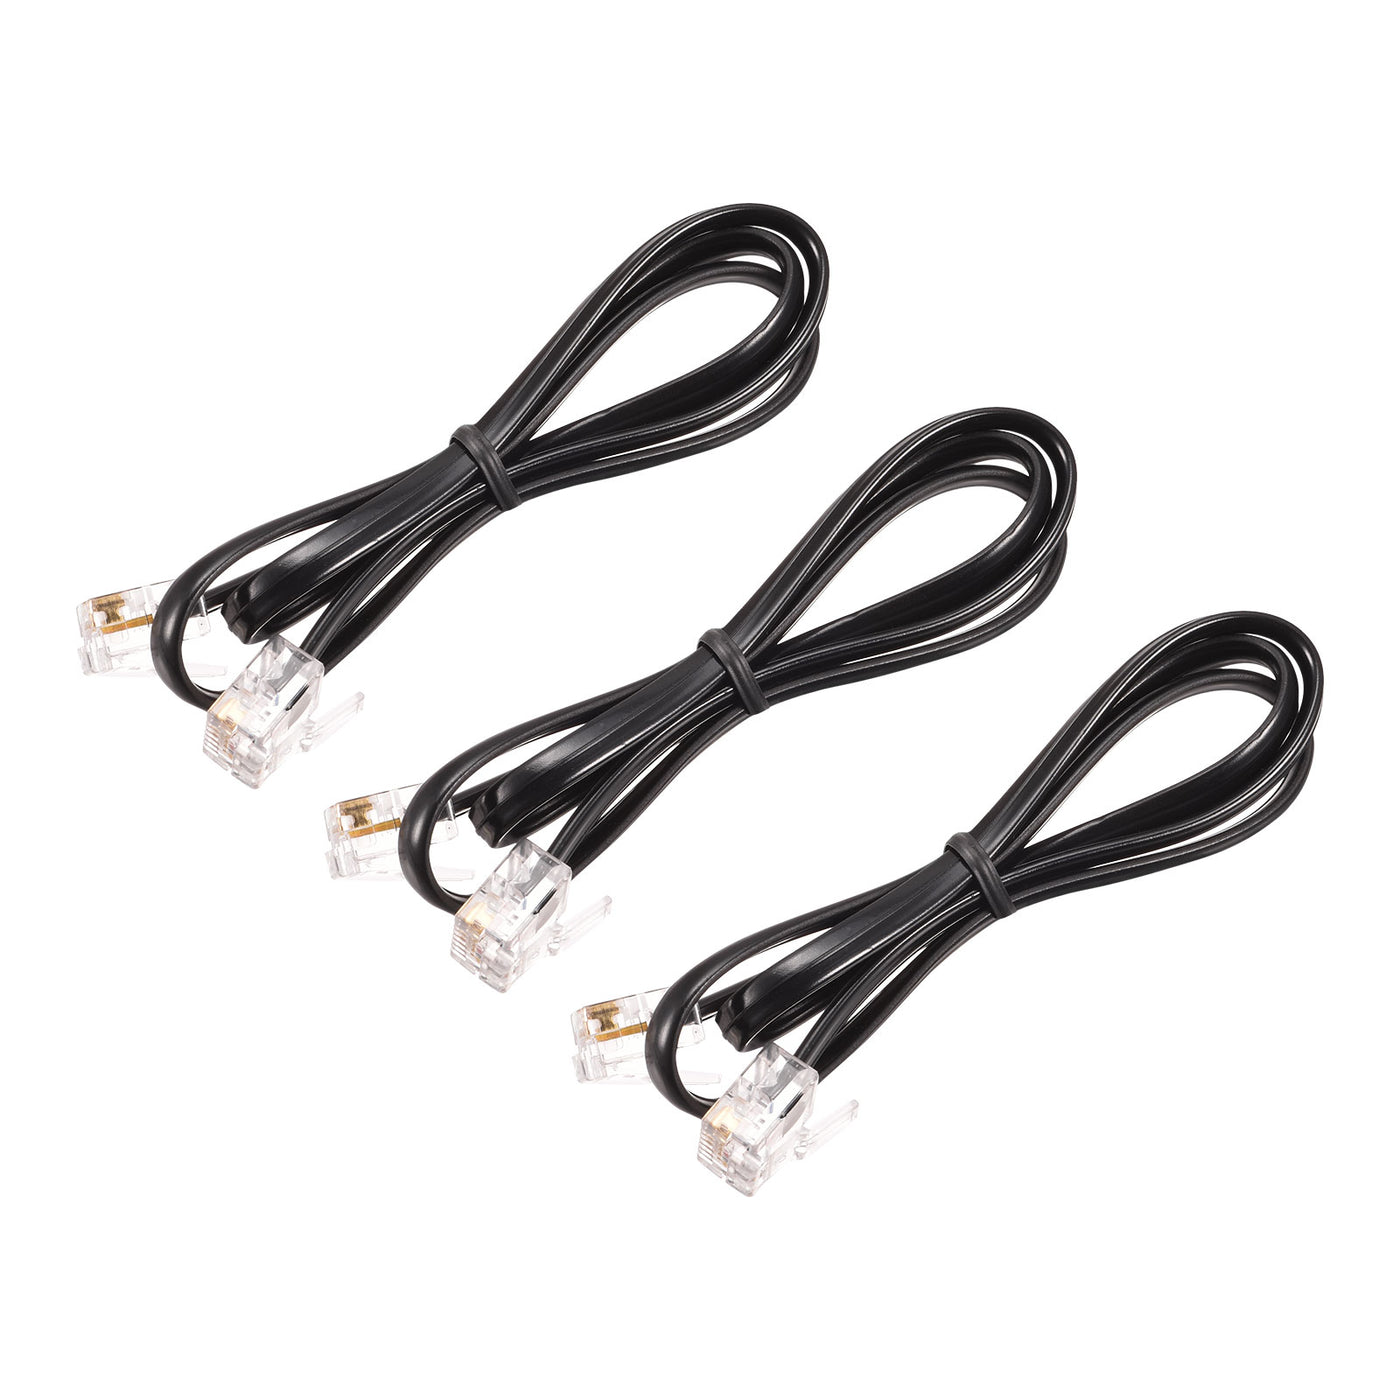 Harfington Phone Extension Cord Telephone Cable Phone Line Cord RJ11 6P4C Plugs, Male to Male for Phone and Fax 3pcs